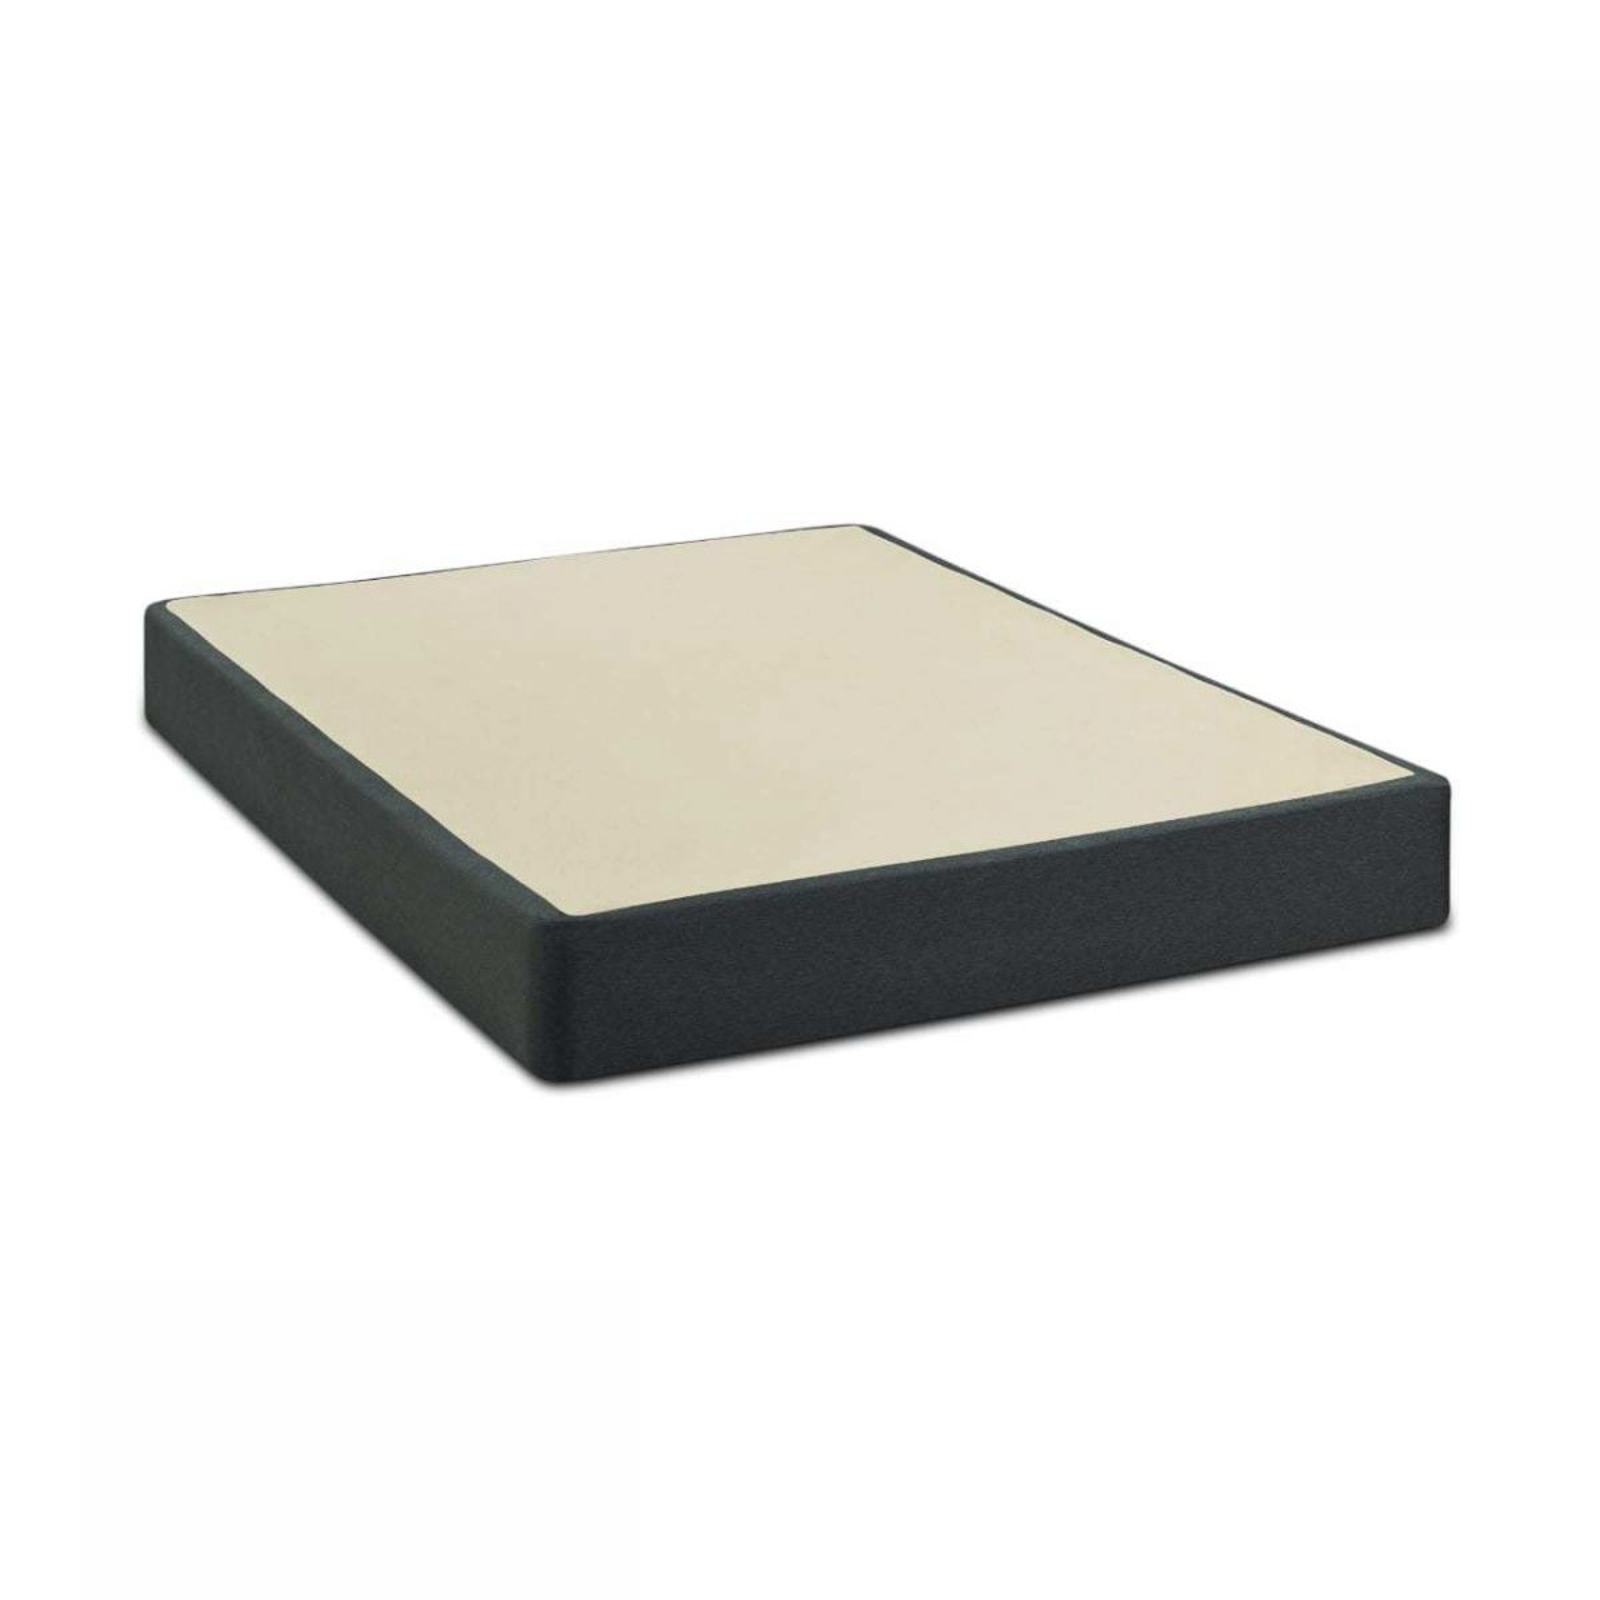 Picture of Sealy Posturepedic Standard Boxspring, King